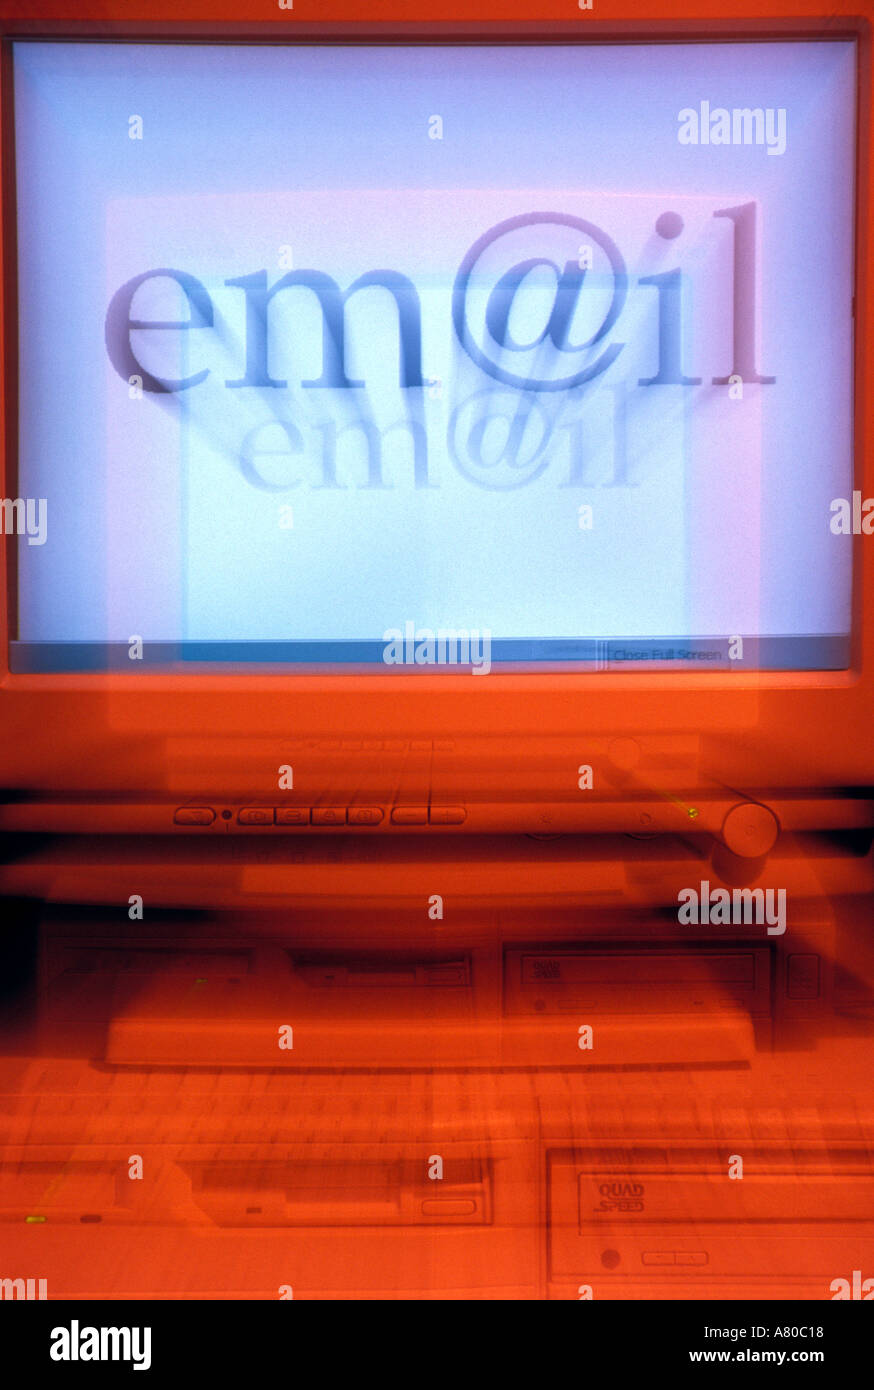 Email screen Stock Photo